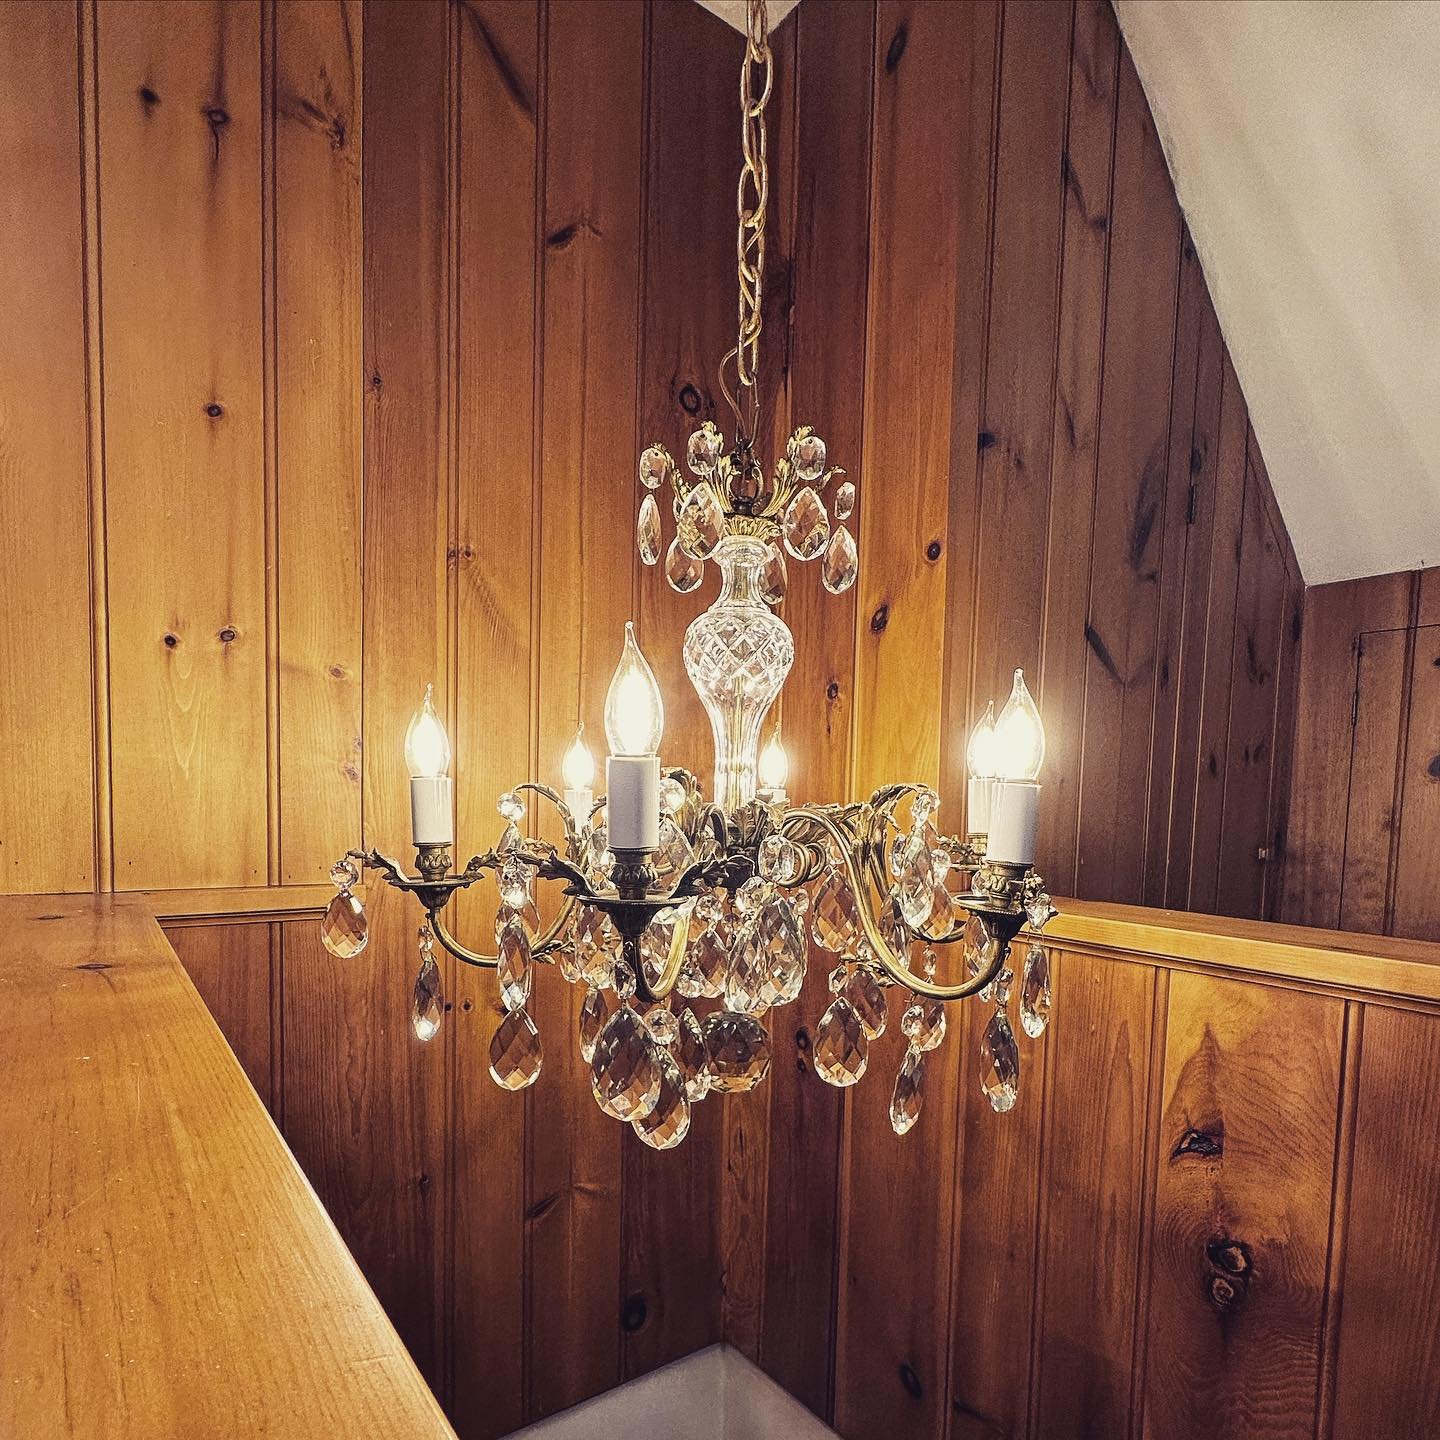 Finally figured out how to cut the candelabra covers down to size neatly. (heated utility knife &amp; patience + diamond sanding block) One completely rewired, refinished and re-assembled chandelier.